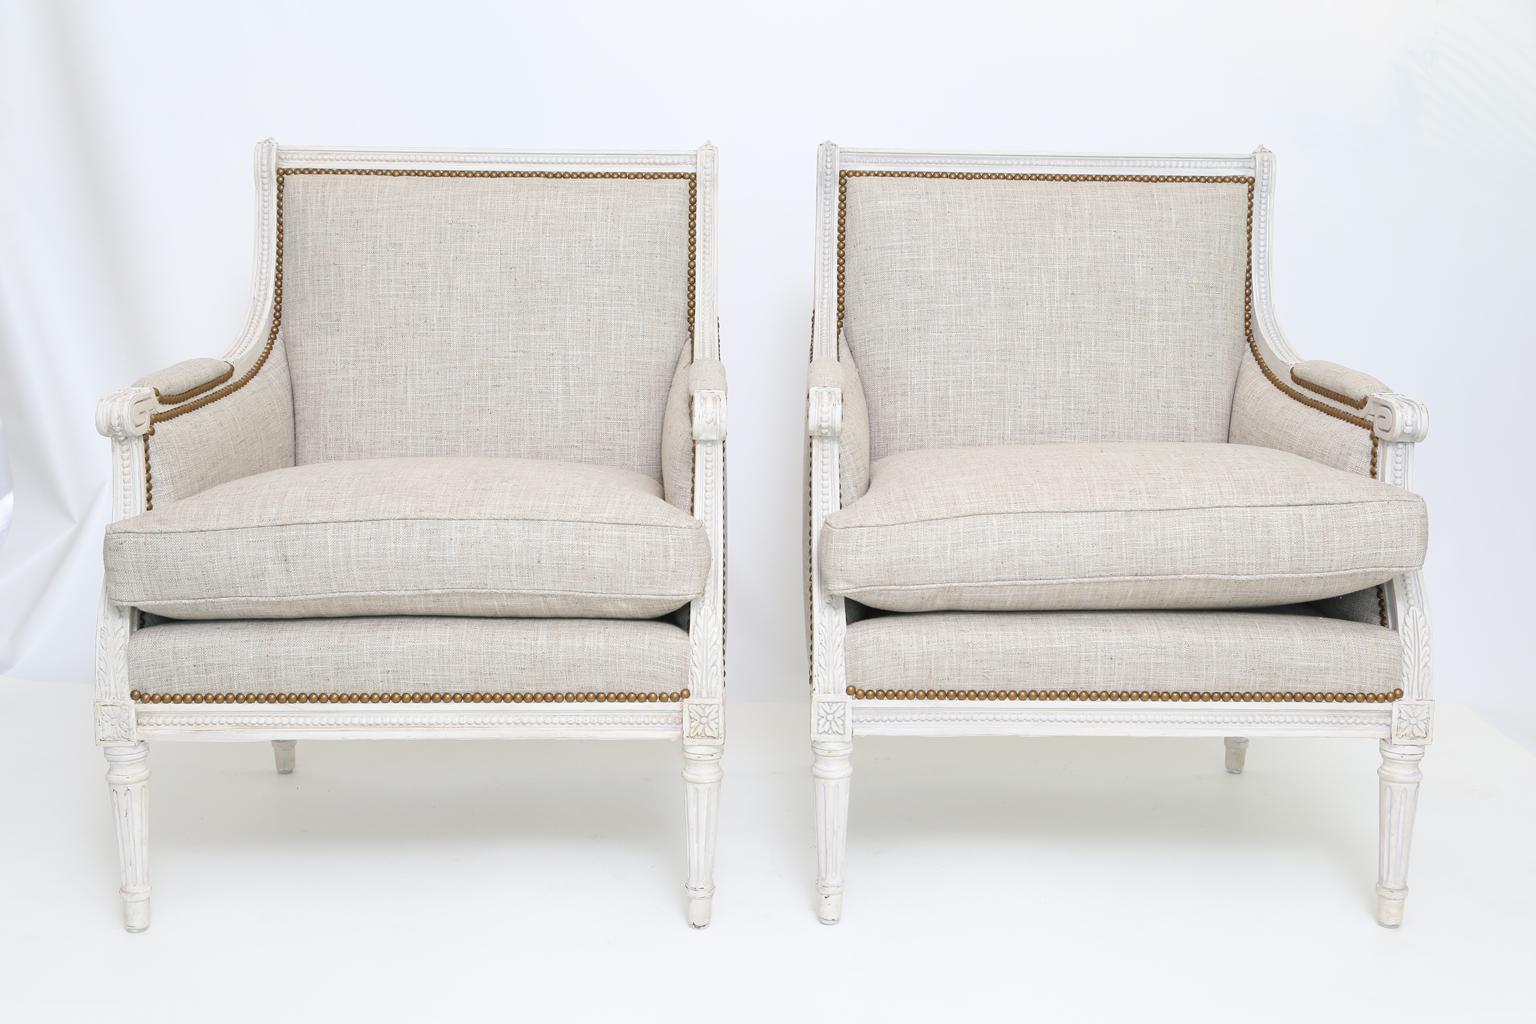 Pair of upholstered closed armchairs, in Louis XVI taste, each having a painted frame showing desirable wear, channeled frames inset with beading, the straight toprail flanked by finials, the padded armrests ending in scrolls, on downswept